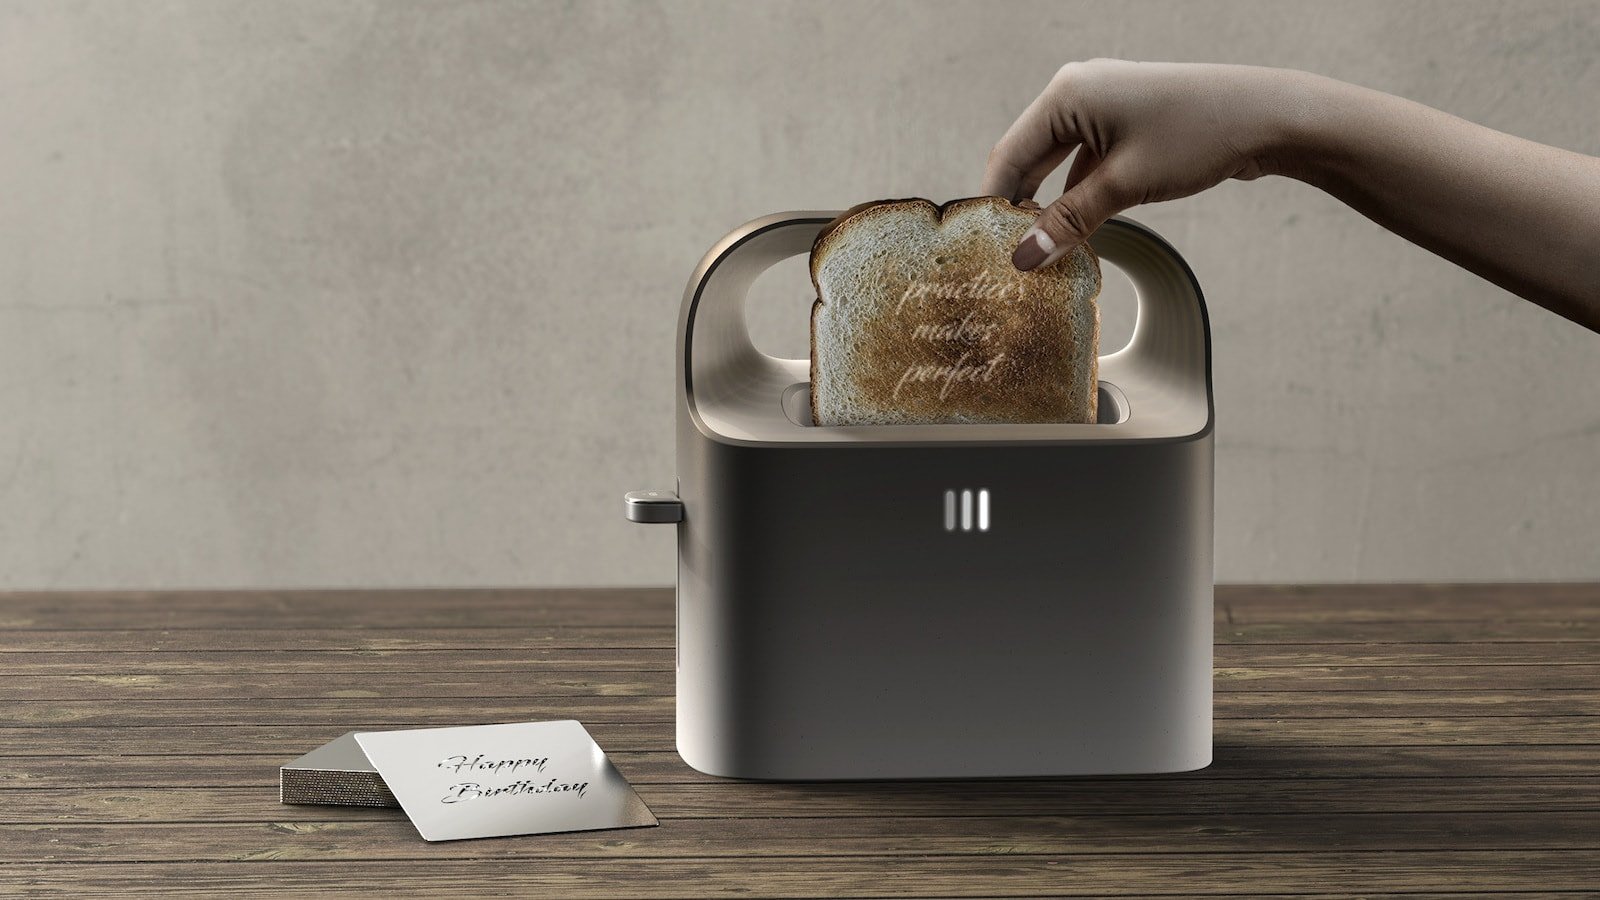 Party Hoaster imprinting toaster helps you celebrate intimate events